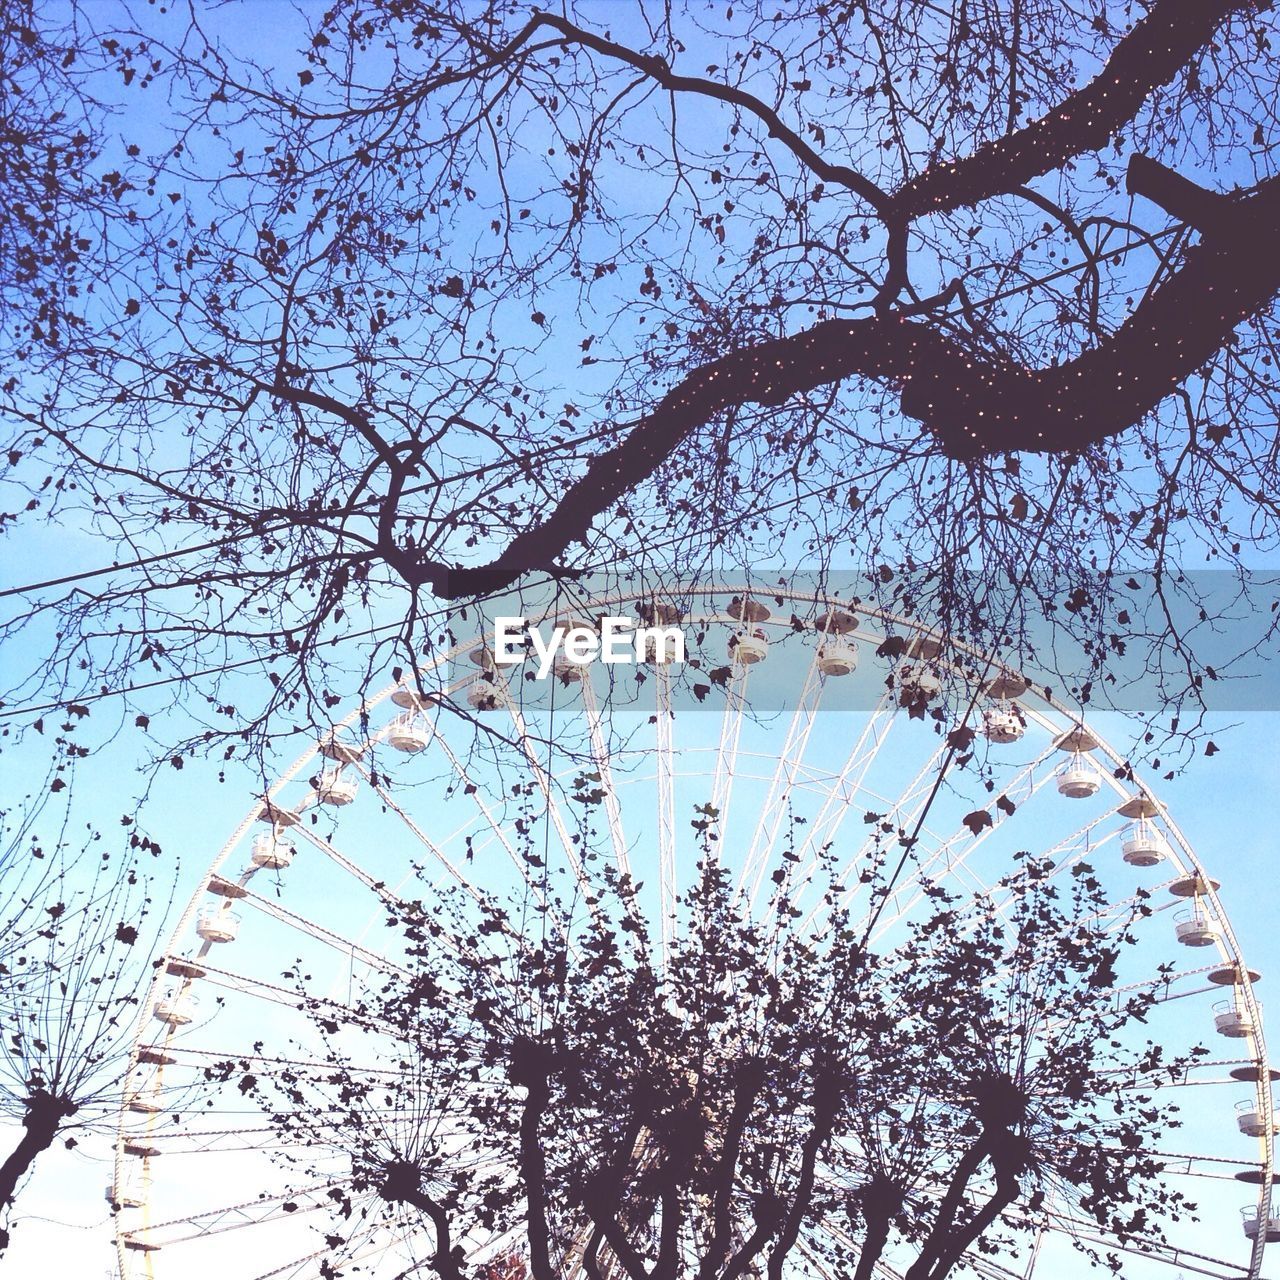 Low angle view of bare tree branch with ferris wheel in background